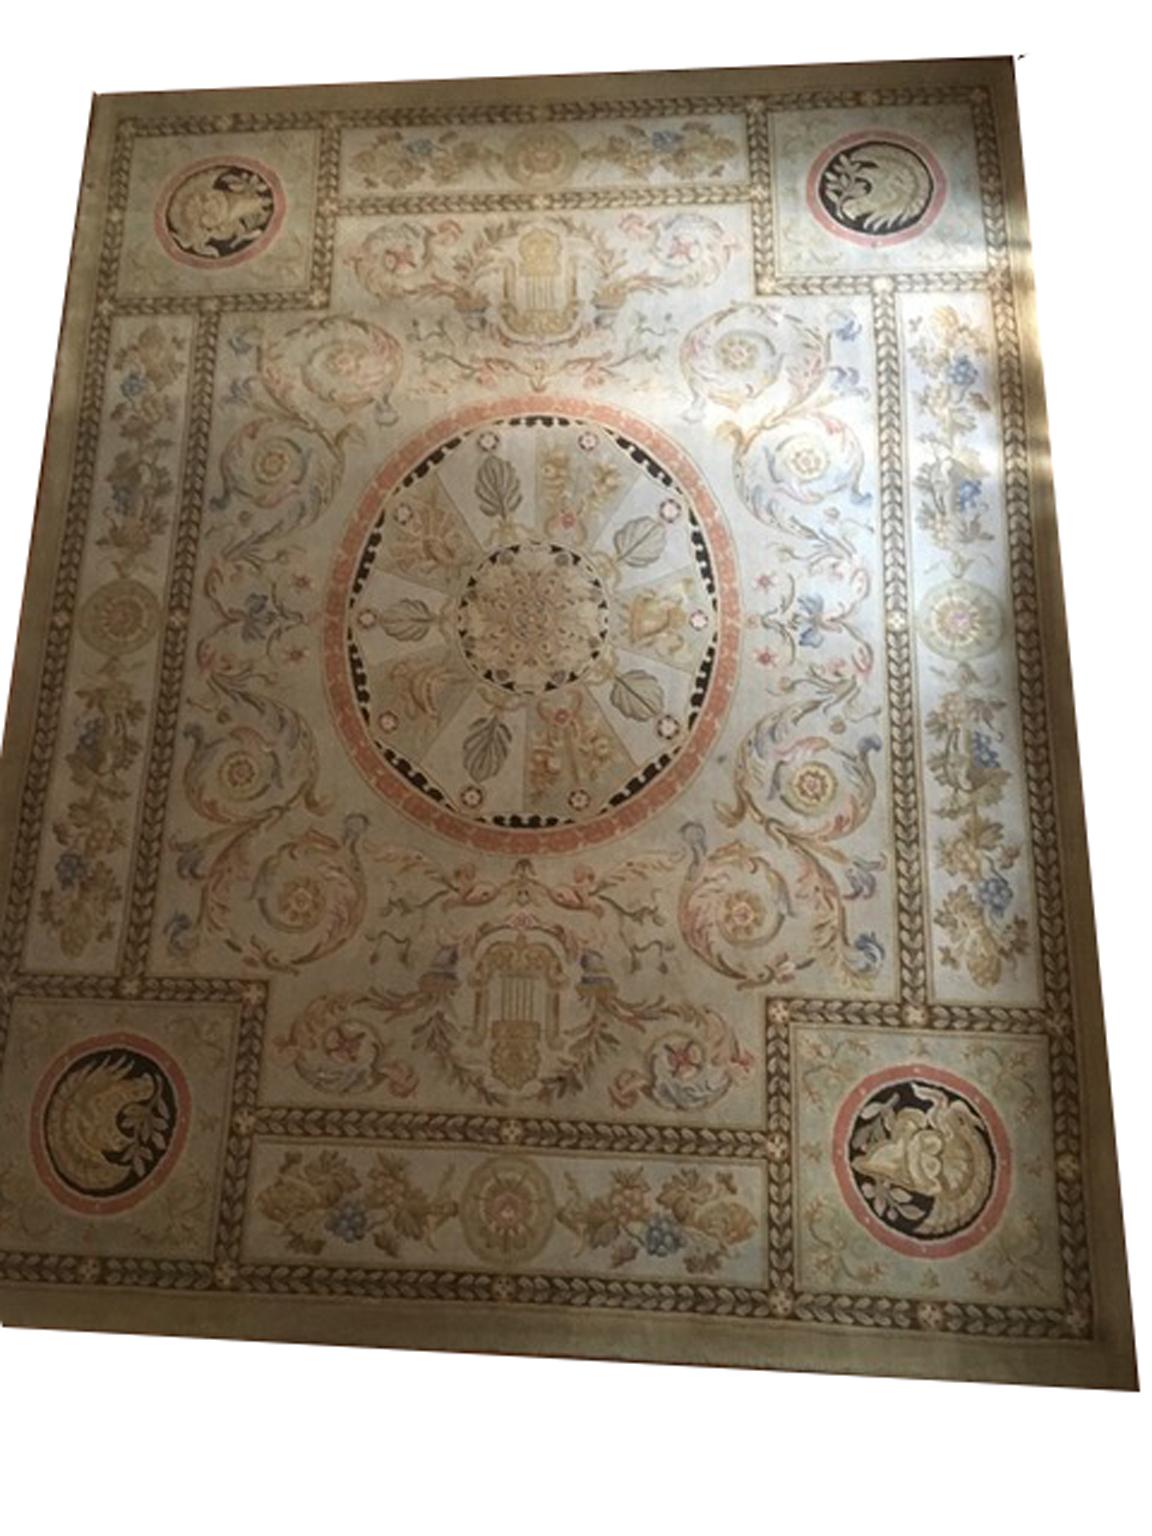 This Mid-Century French wool rug has been manufactured in France in circa 1960 in the French neoclassical style, called Savonnerie. The central medallion is typical of French Empire style. The pastel colors of flower's bunches, like orange, ecru',